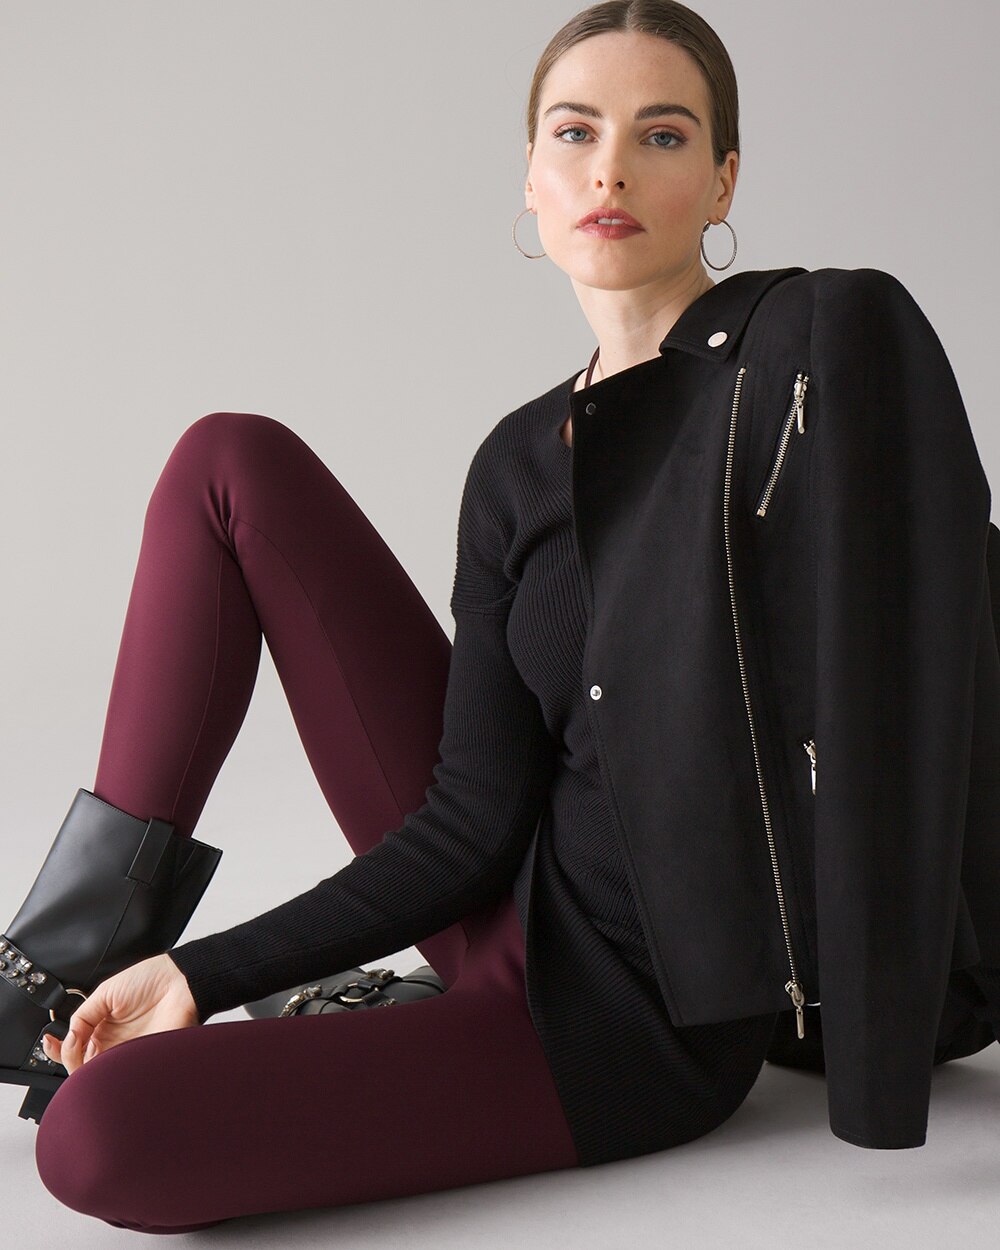 Scuba Knit WHBM Runway Leggings video preview image, click to start video